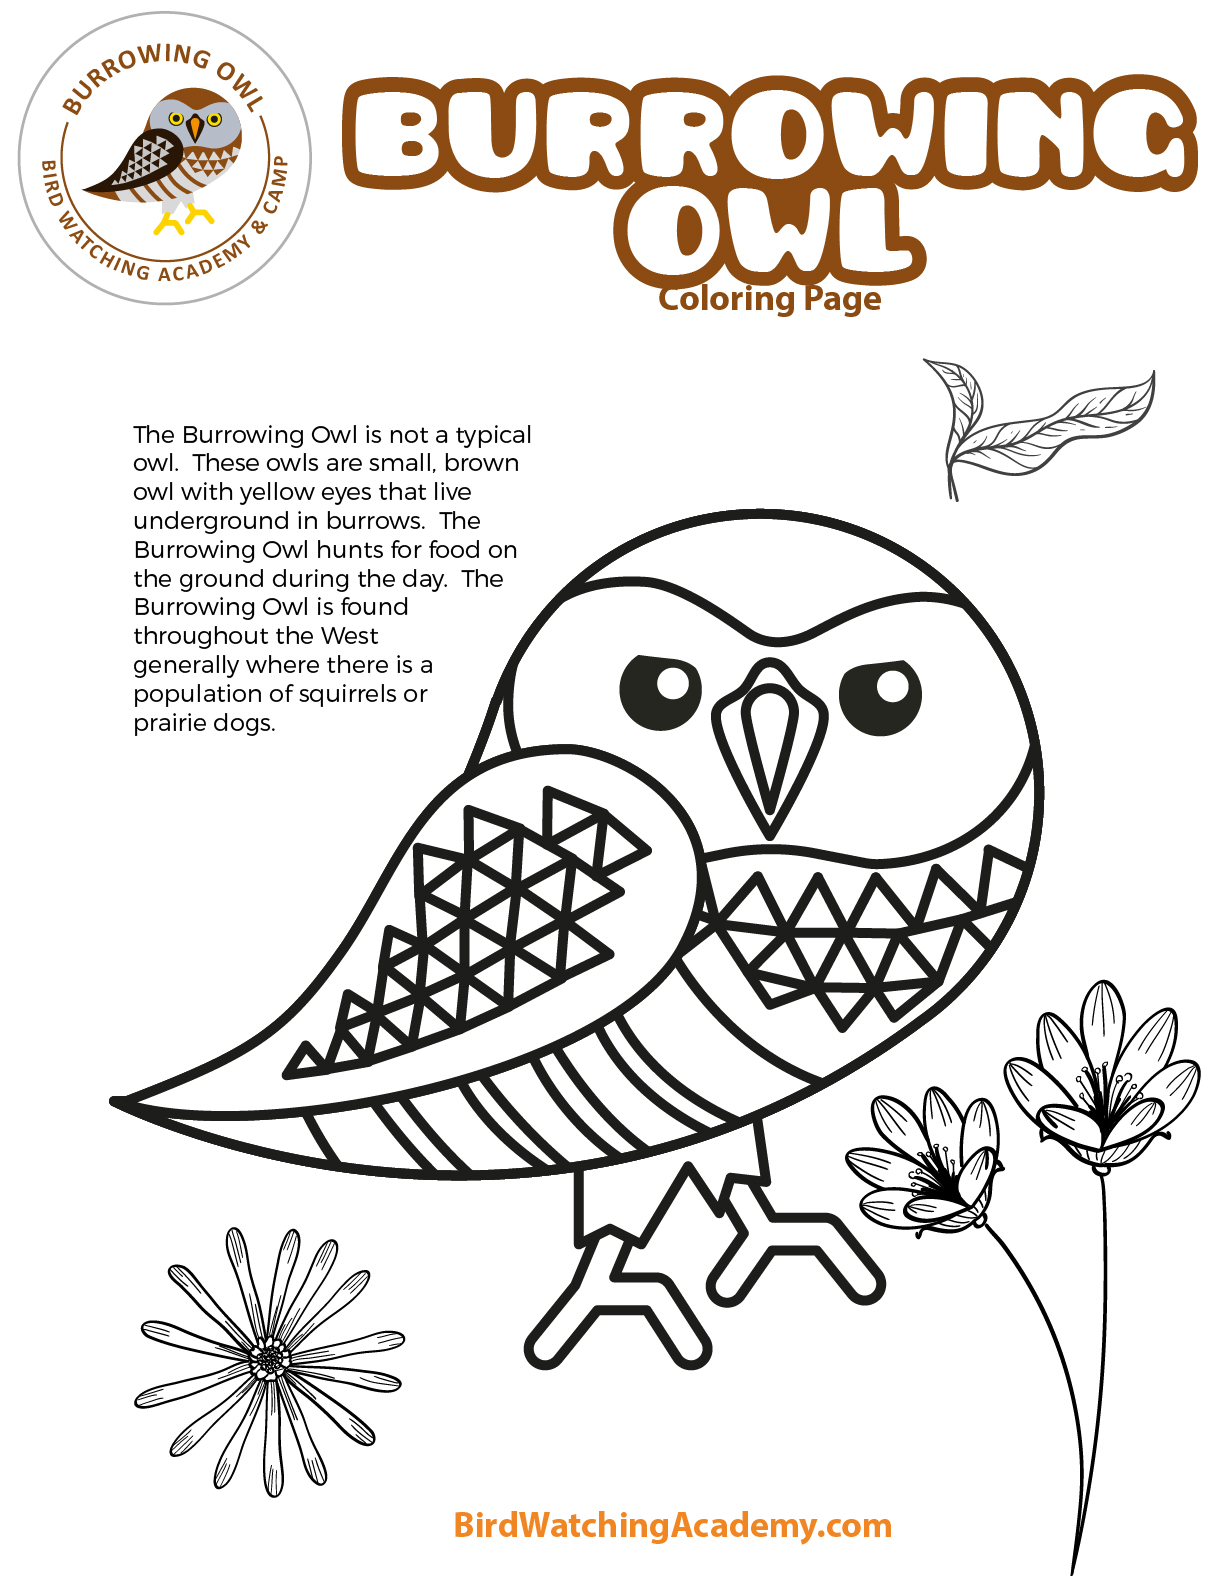 Burrowing owl coloring page